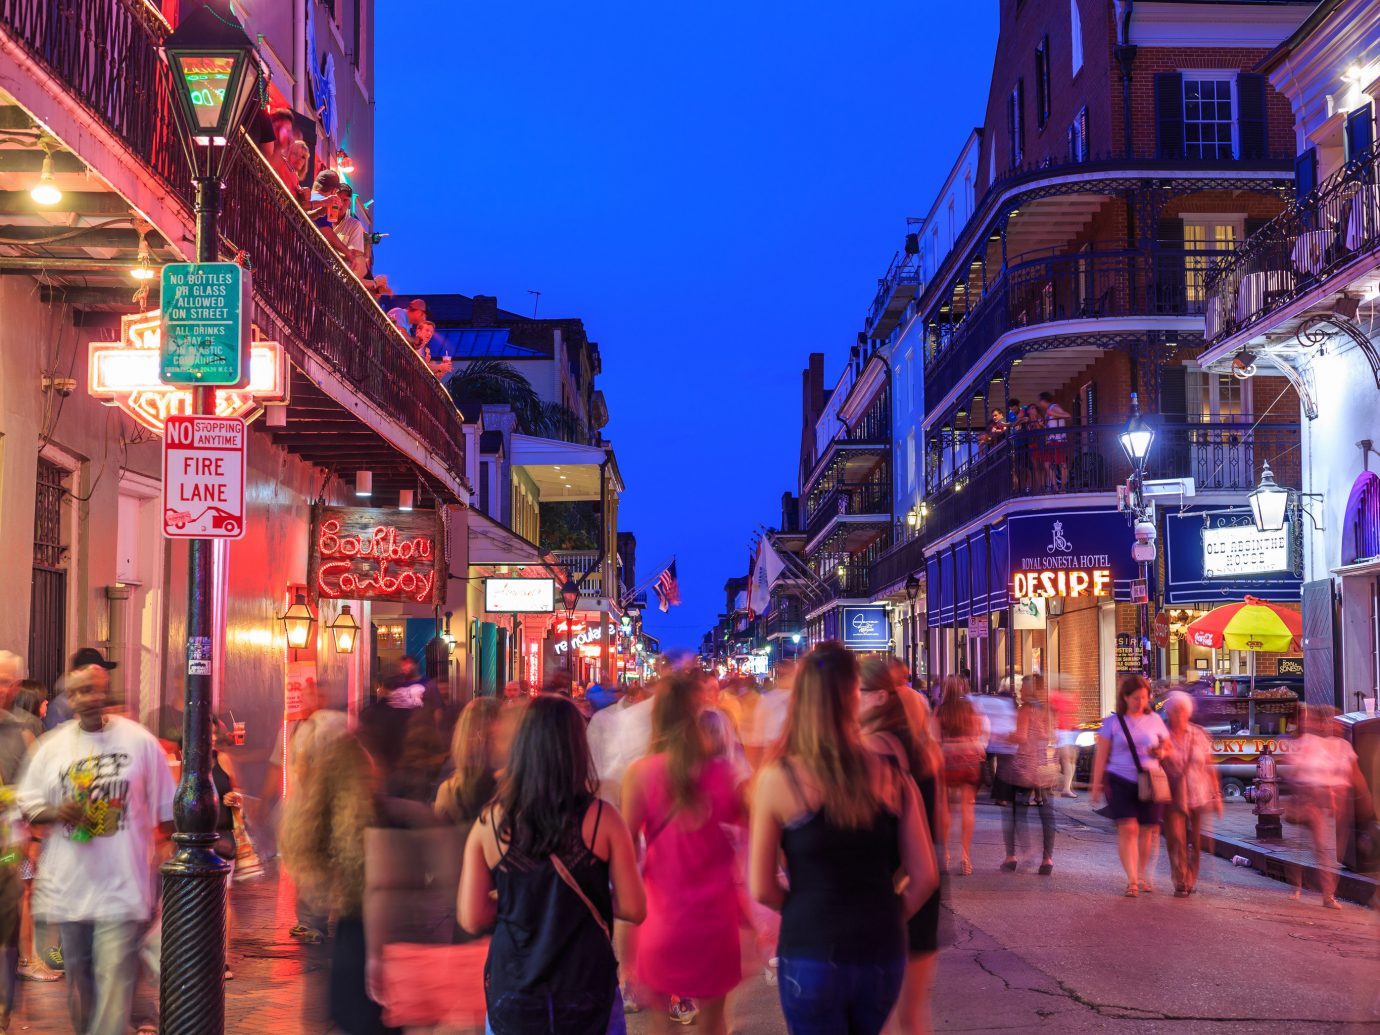 Girls Getaways New Orleans Trip Ideas Weekend Getaways building outdoor street color person crowd road Town City walking human settlement night vacation tourism market Downtown evening infrastructure way travel busy